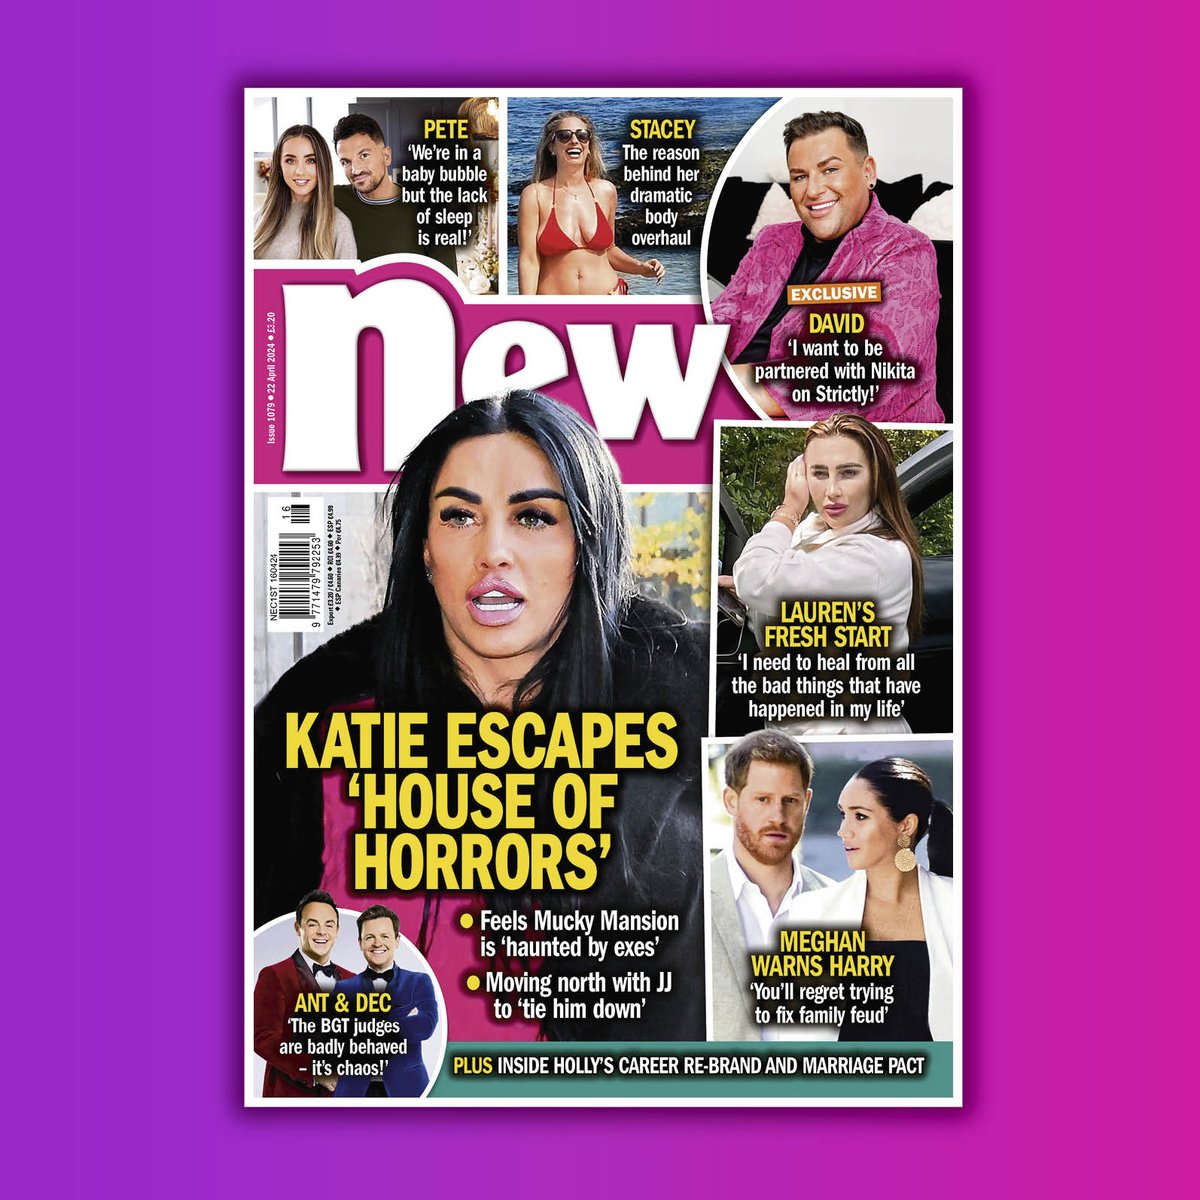 ✨NEW ISSUE ALERT✨ In this week's issue we've got Katie's 'house of horrors', Meghans warning to Harry and Laurens fresh start. 😍👀 Out now!💫💫💫